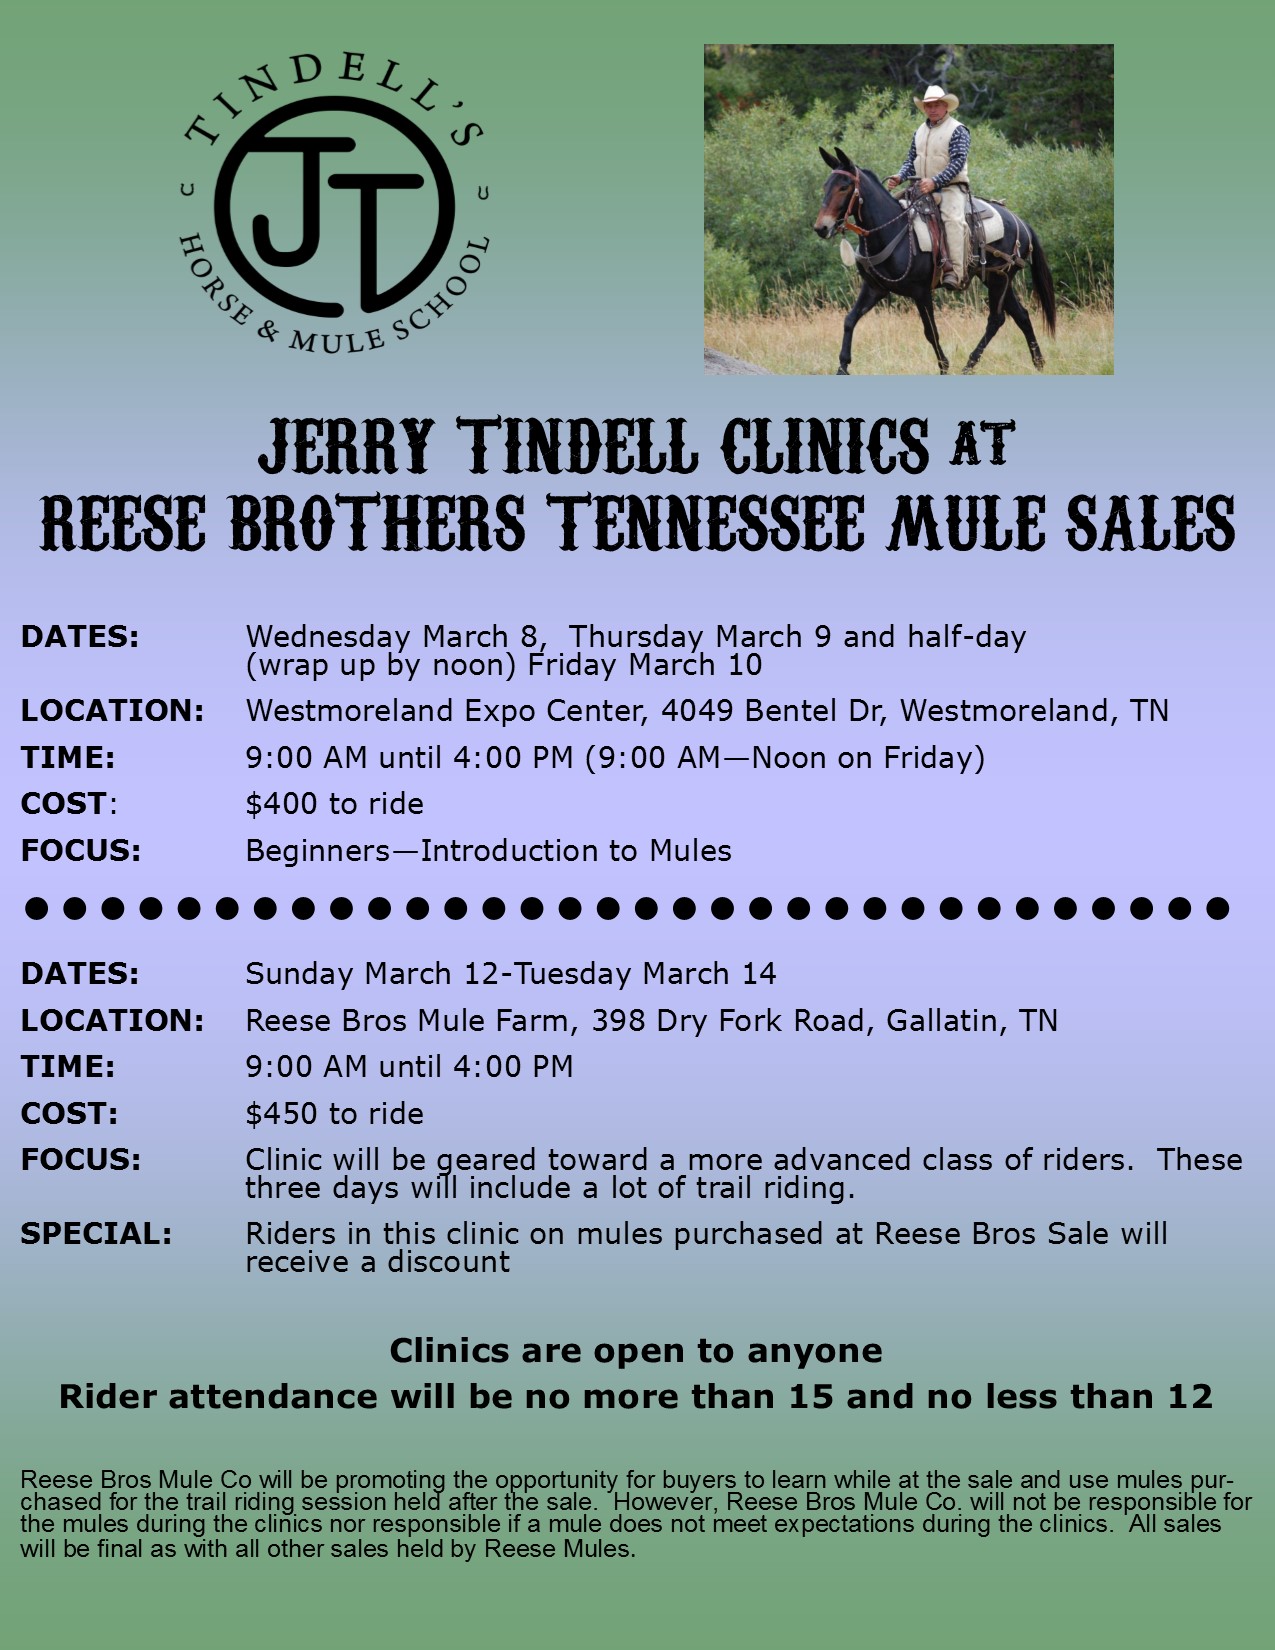 Reese Bros Sale Clinics 03.2017 - Jerry 